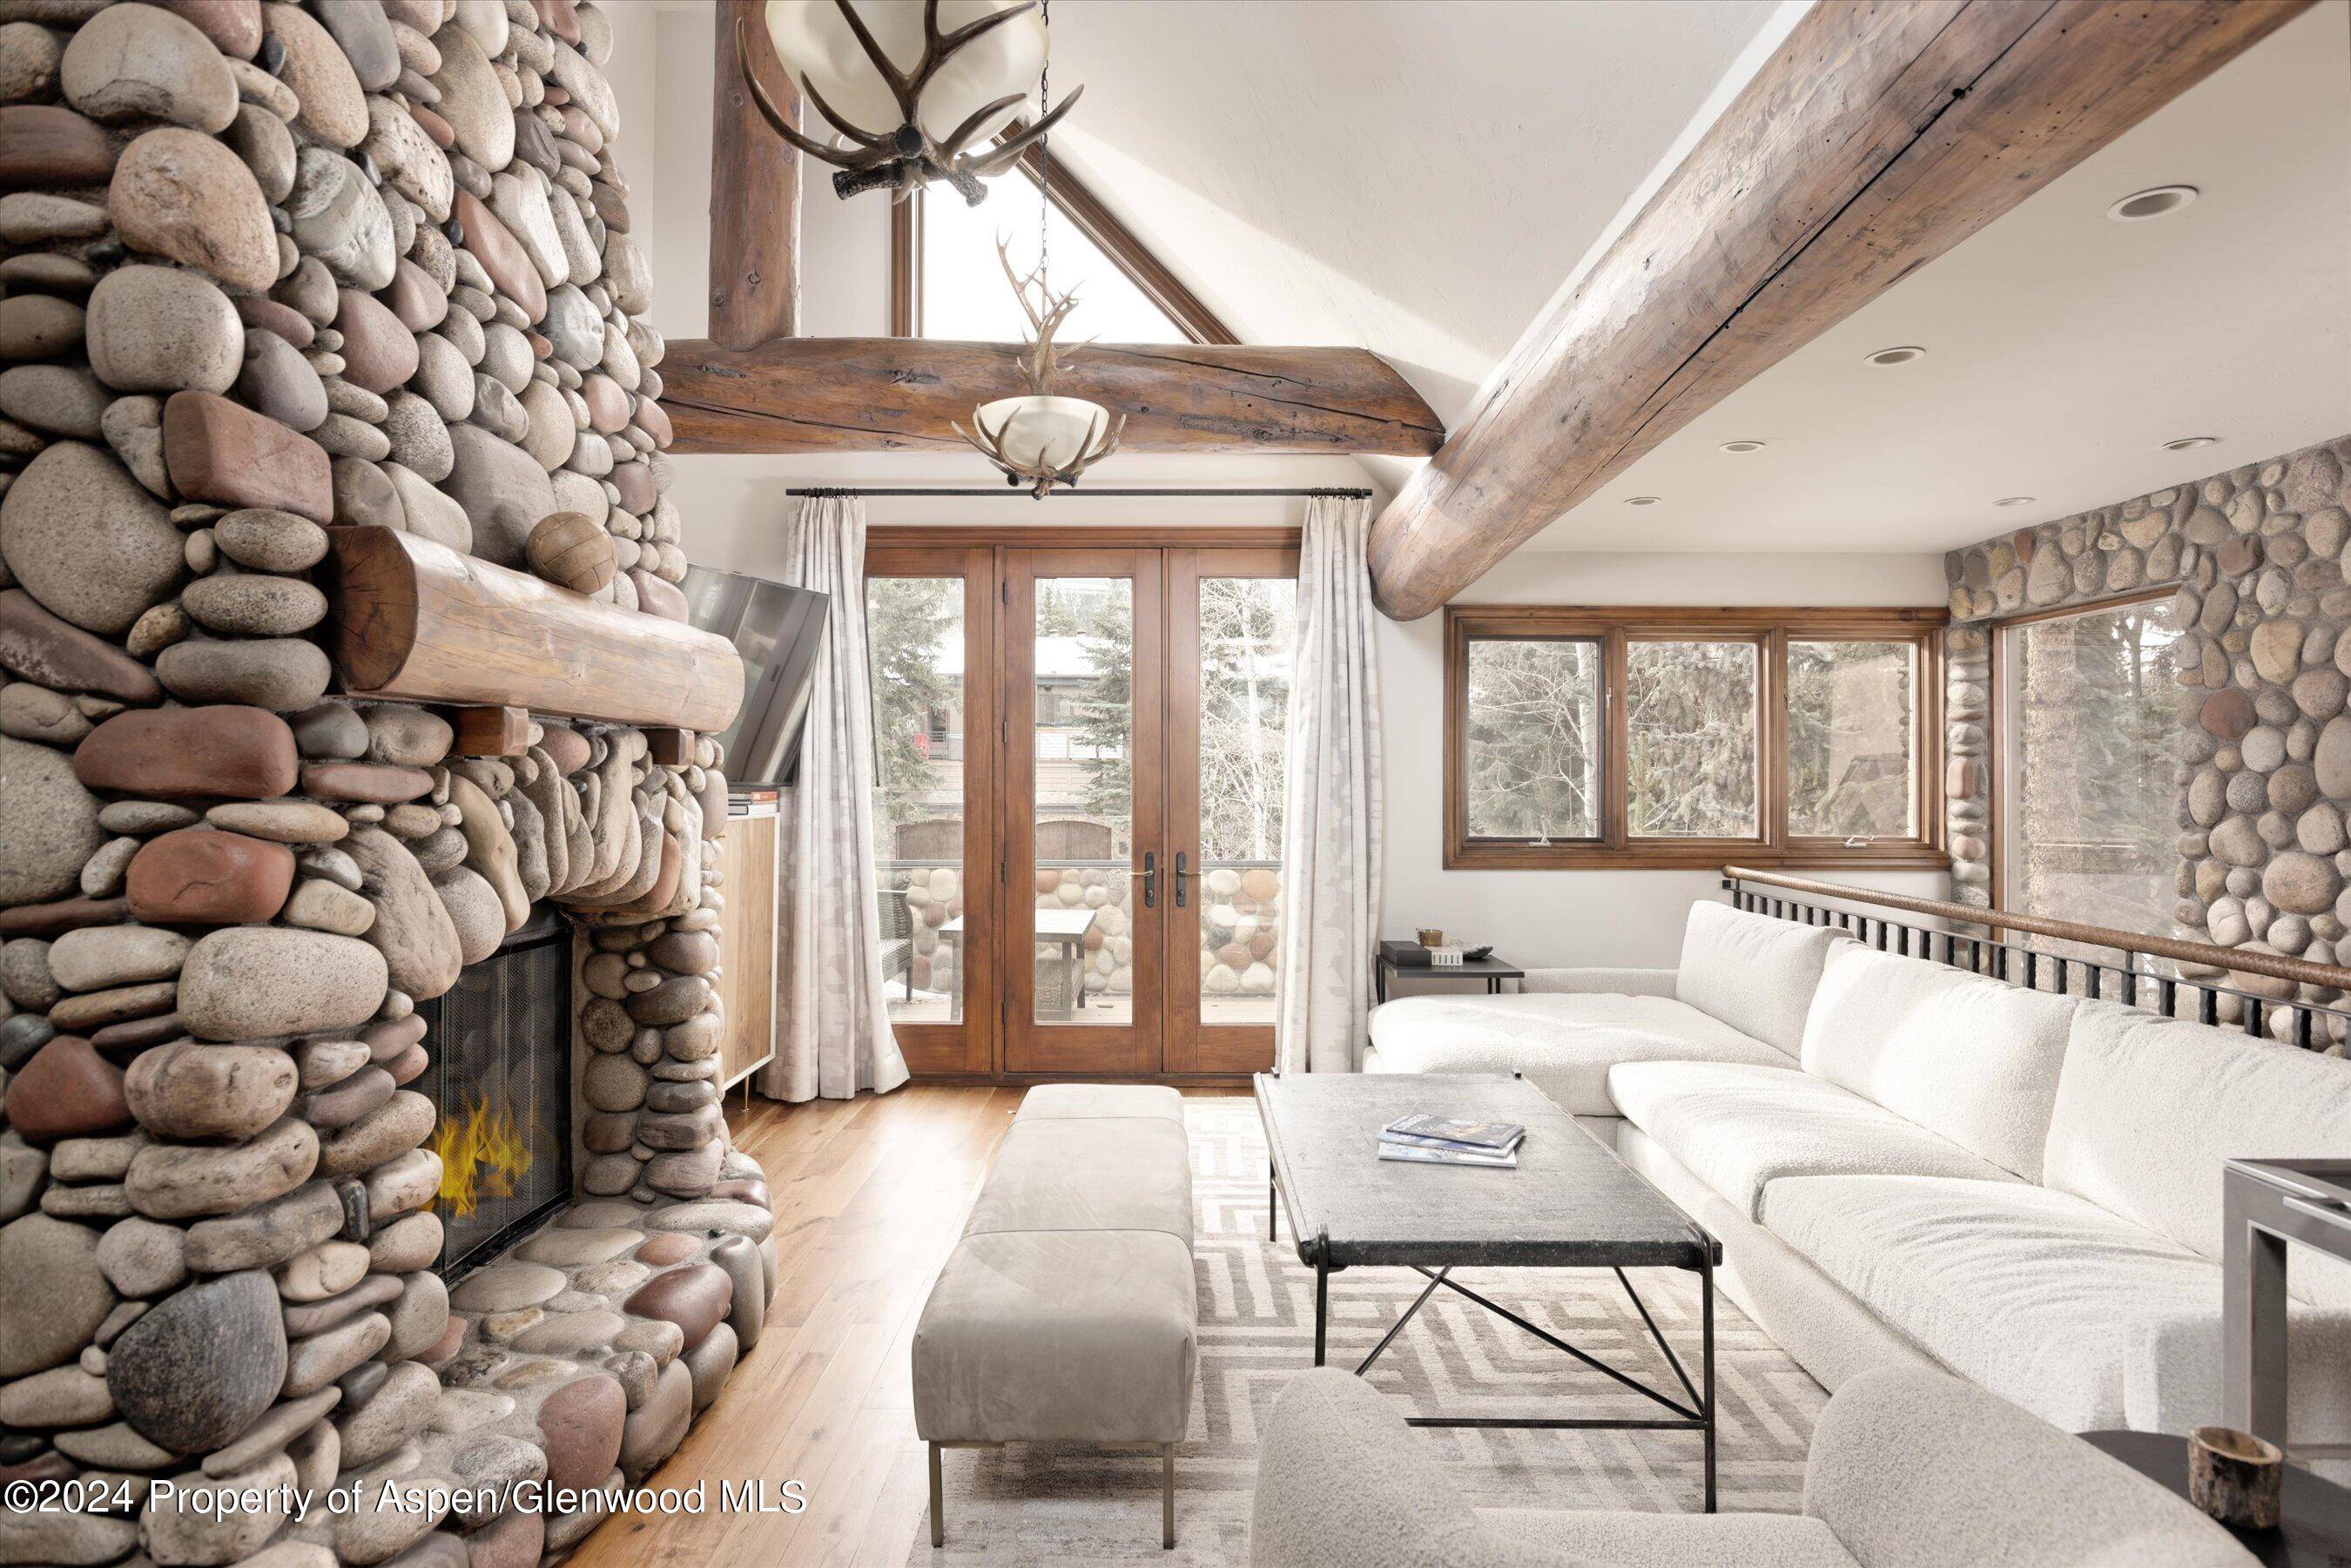 Nestled in the heart of Aspen, this mountain modern retreat at 1016 East Hyman Avenue, offers an unparalleled sense of solitude, privacy, and nature.